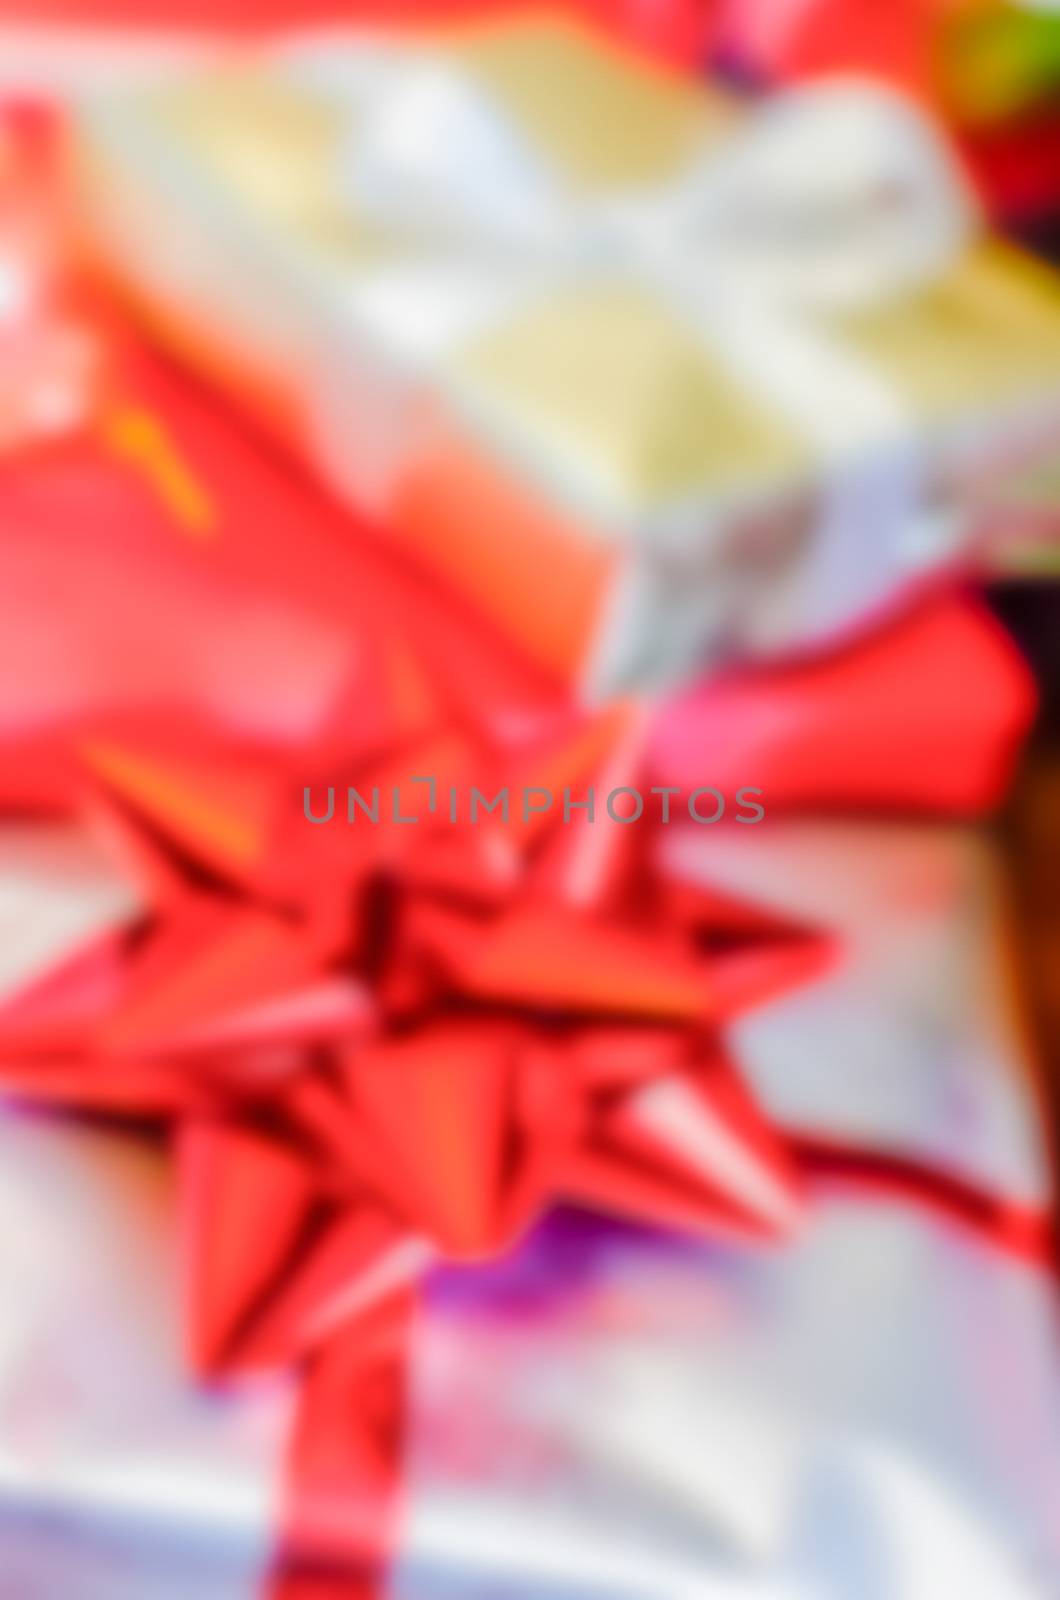 Defocused background of Christmas gifts with red packages by marcorubino